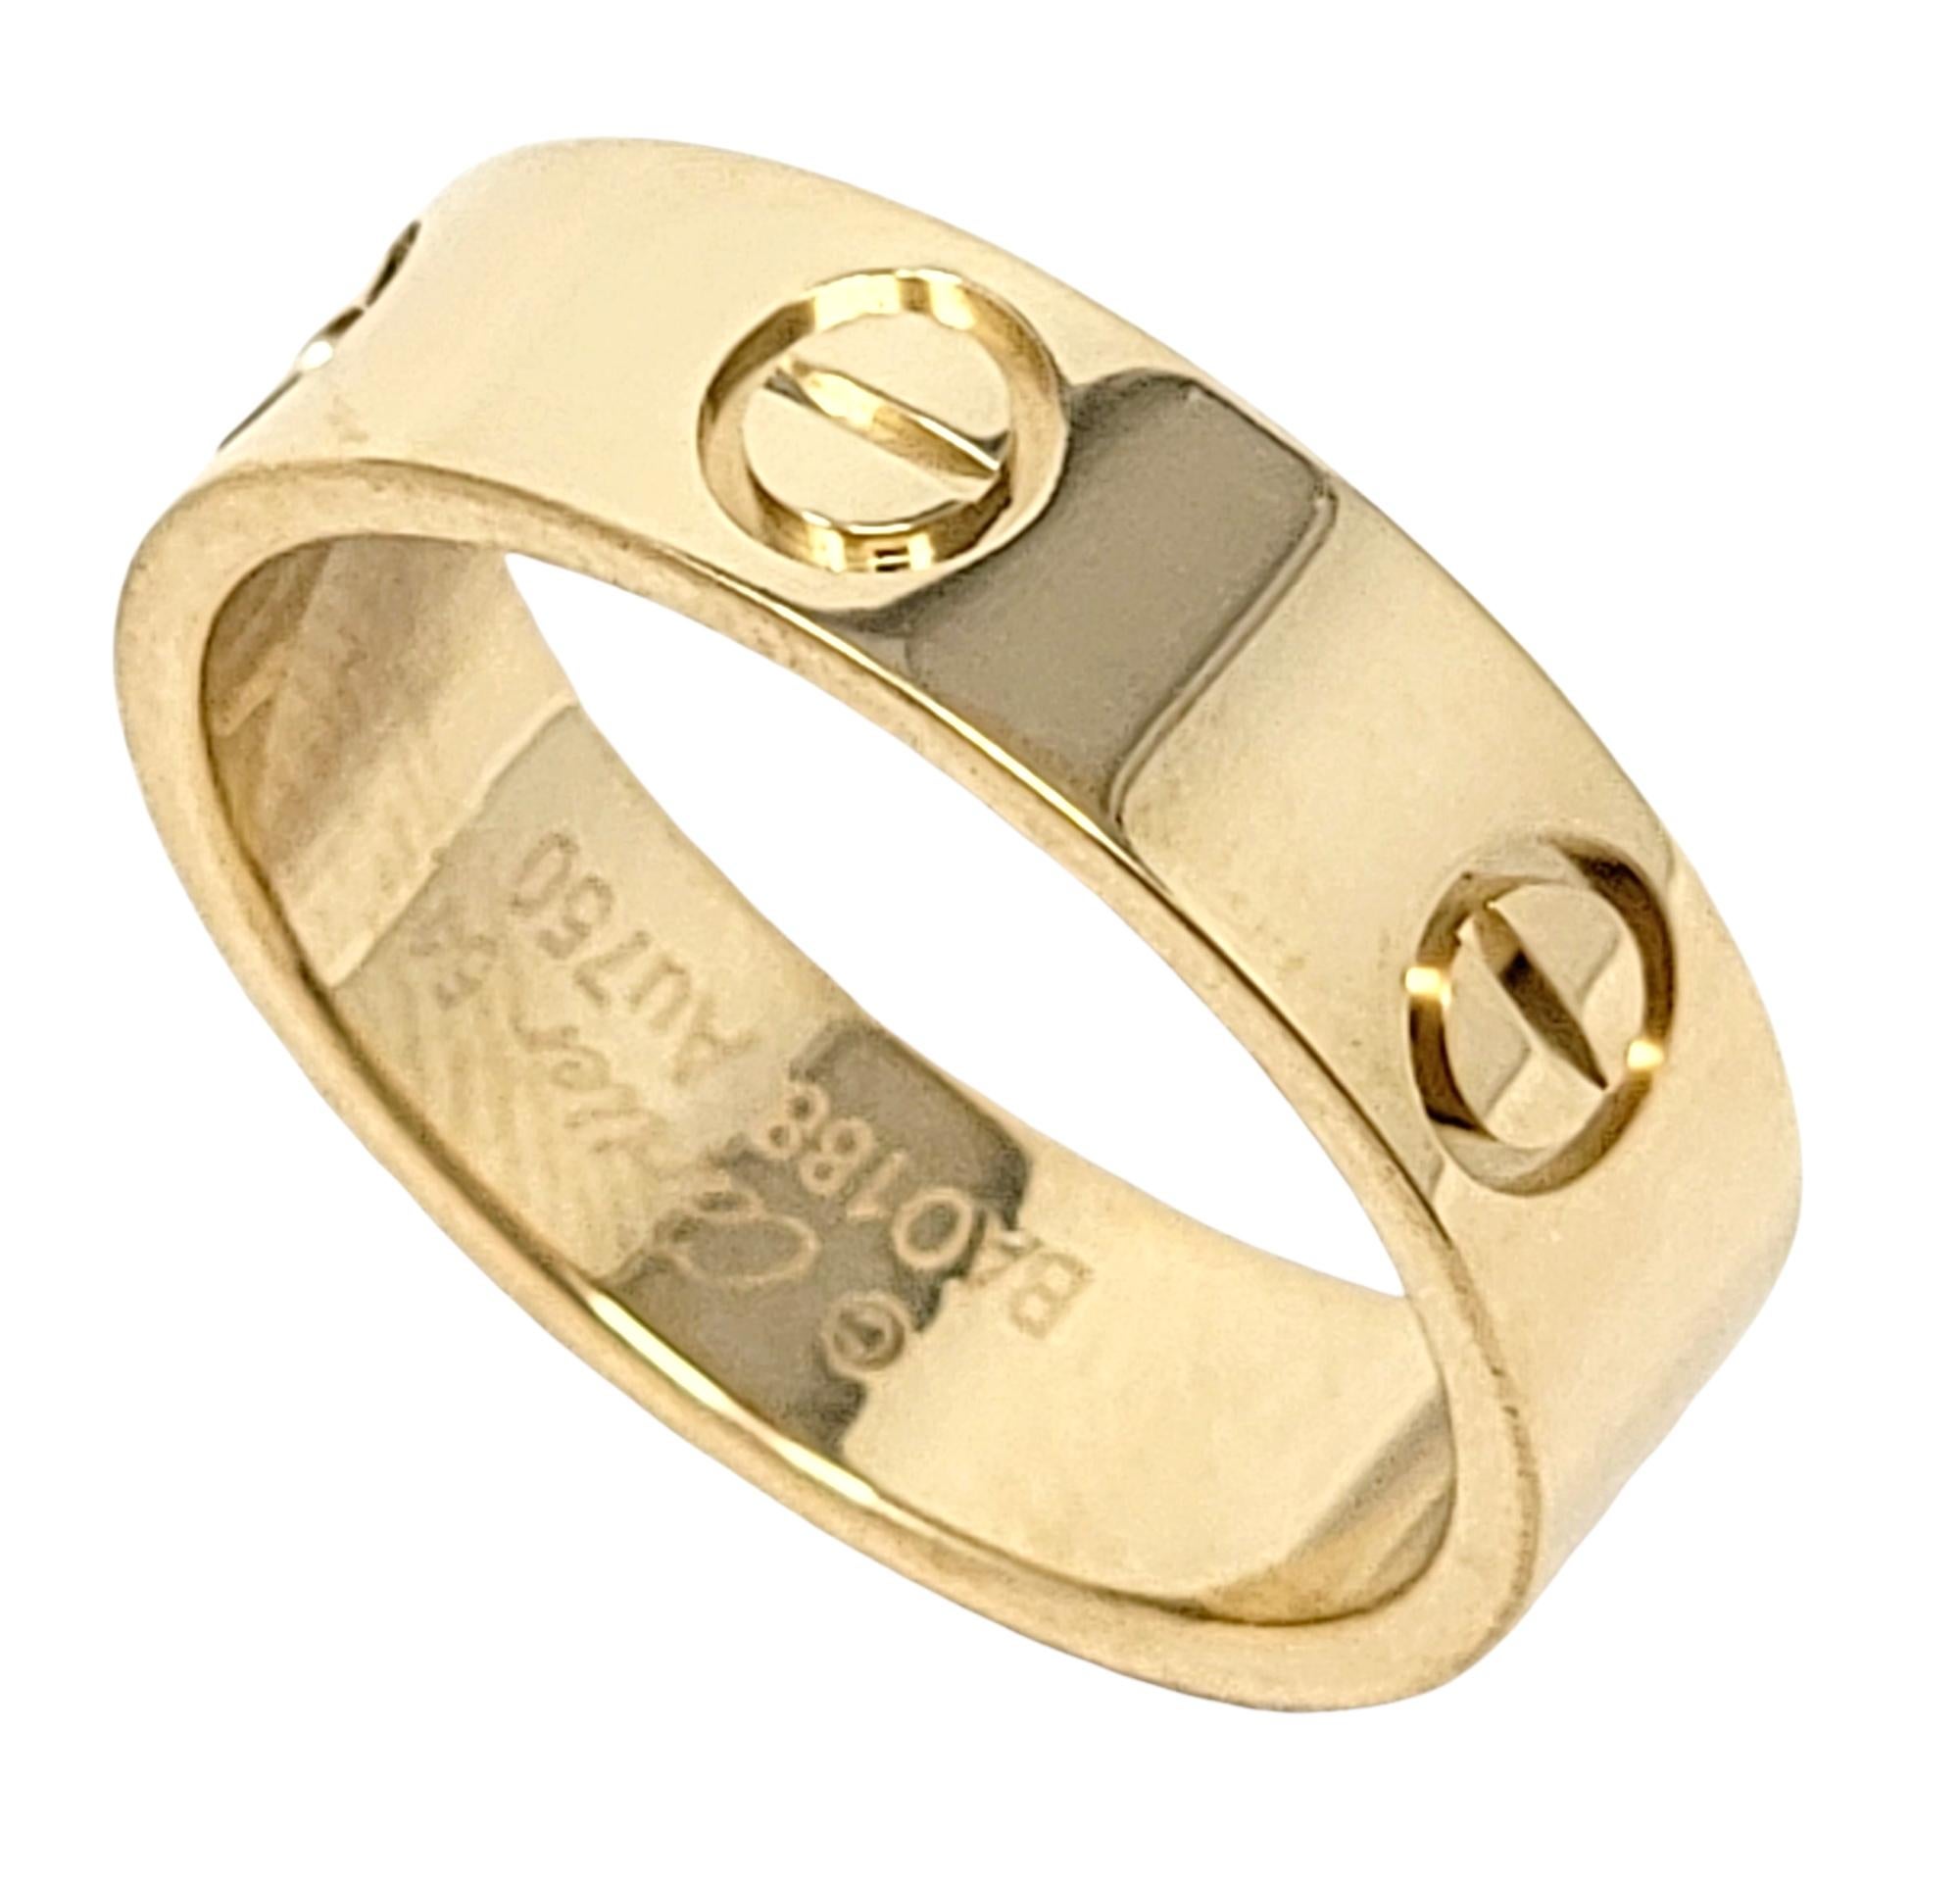 Iconic Love Collection 18 karat polished gold band ring from luxury jeweler, Cartier. This simple, yet timeless piece makes a chic statement on the finger with its clean lines, perfect symmetry, and flawless elegance. 

Ring type: Band
Brand: